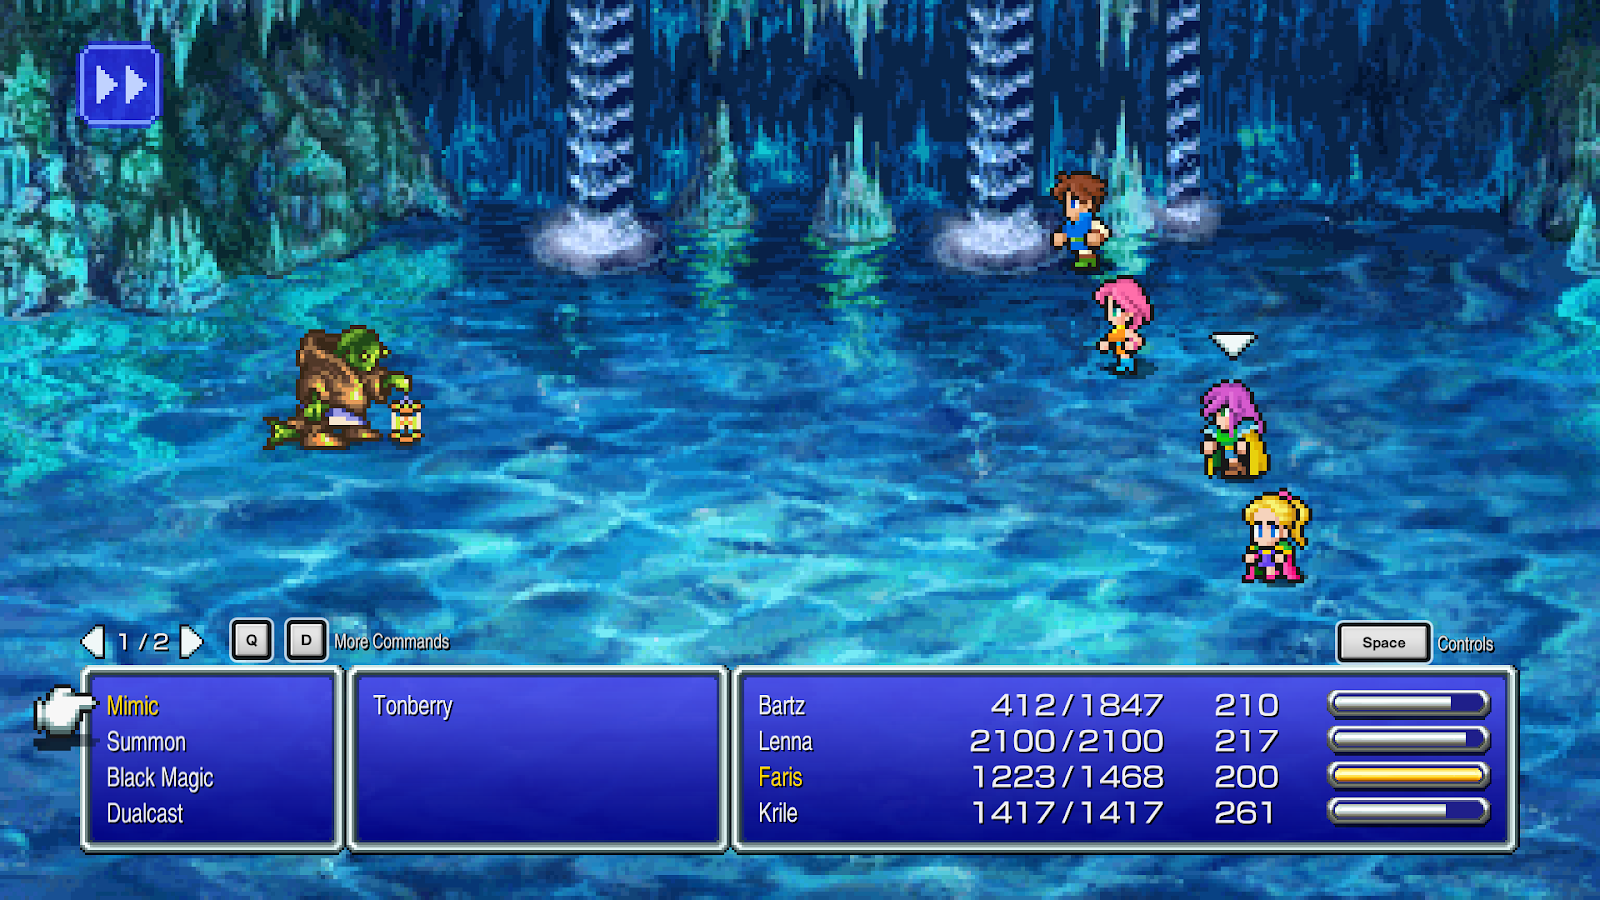 How to Play the Final Fantasy Games in Order